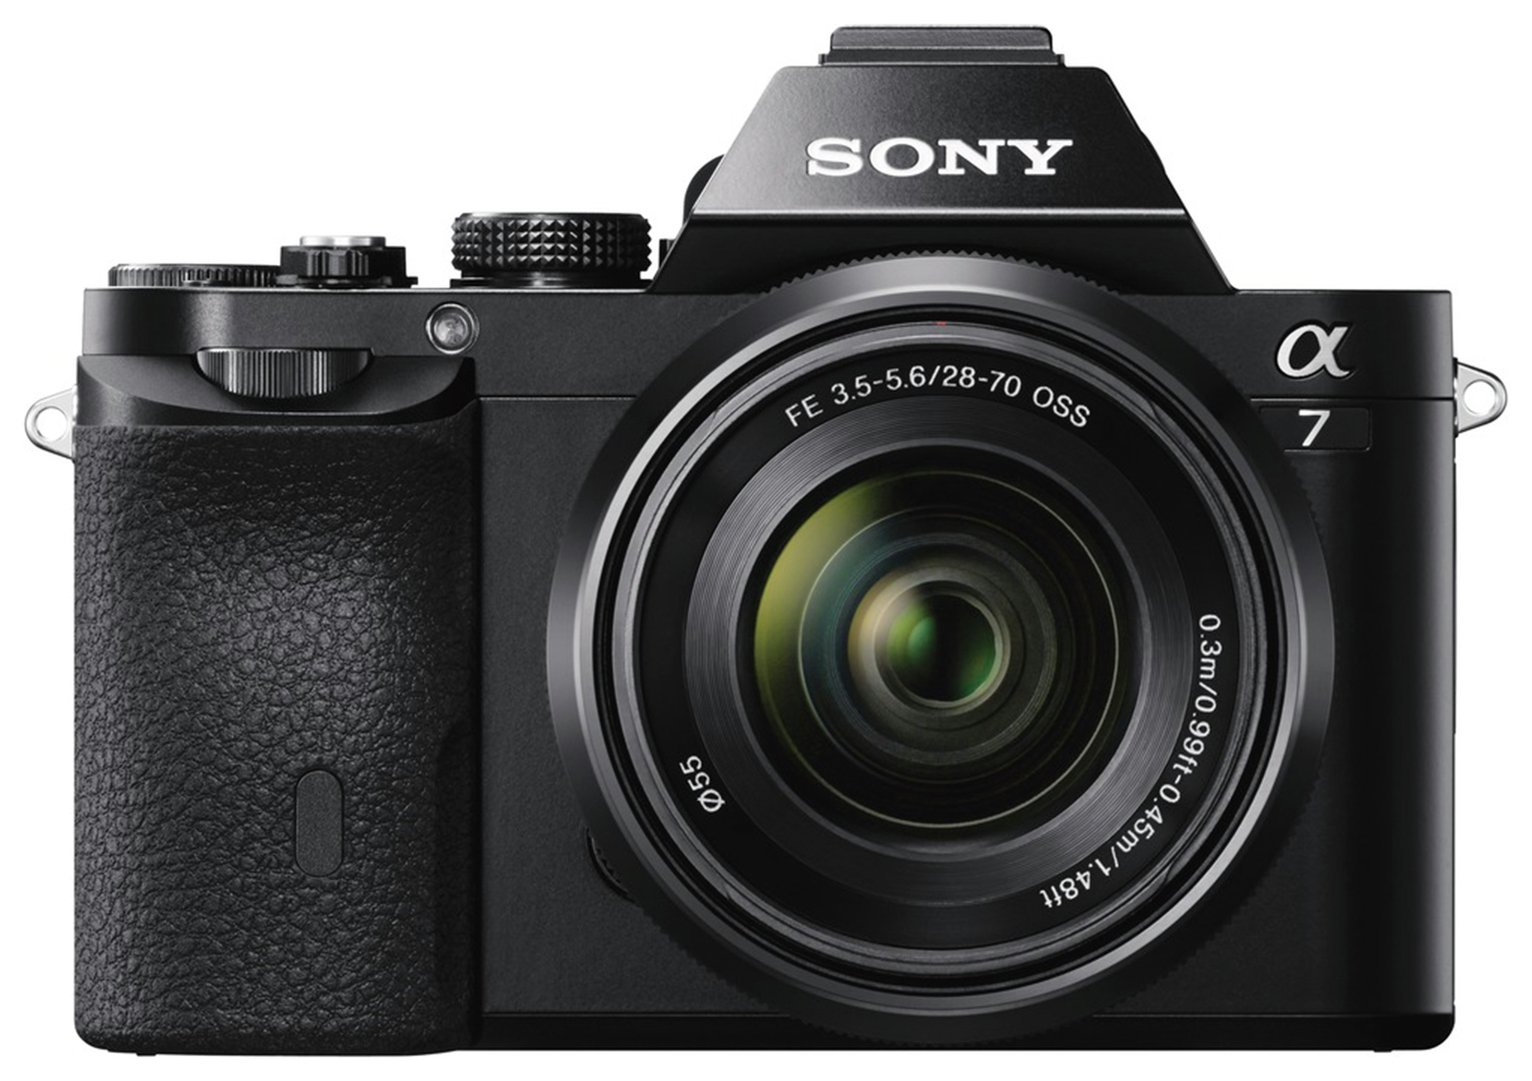 Sony Alpha 7 Mirrorless Camera With 28-70mm Lens